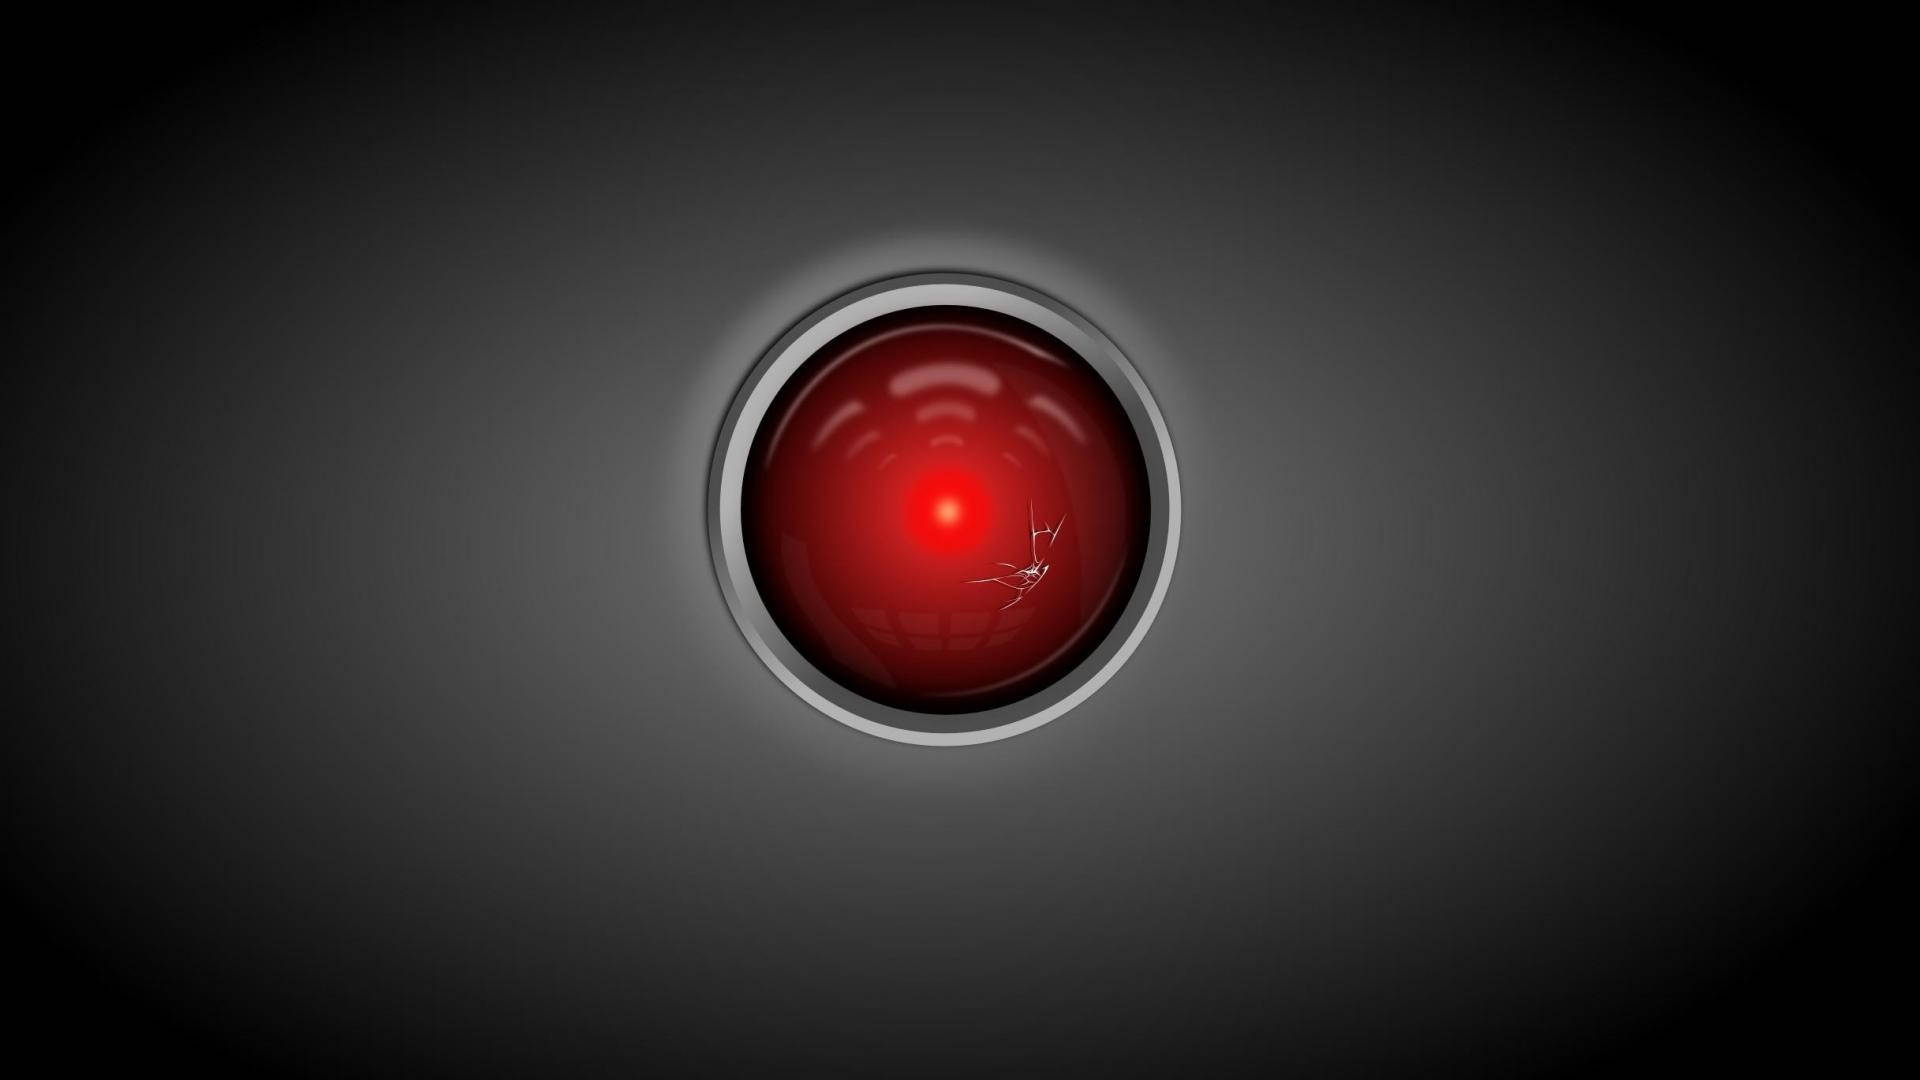 Hal 9000 - A Sentient Artificial Intelligence That Is Both Malevolent And Benevolent Wallpaper